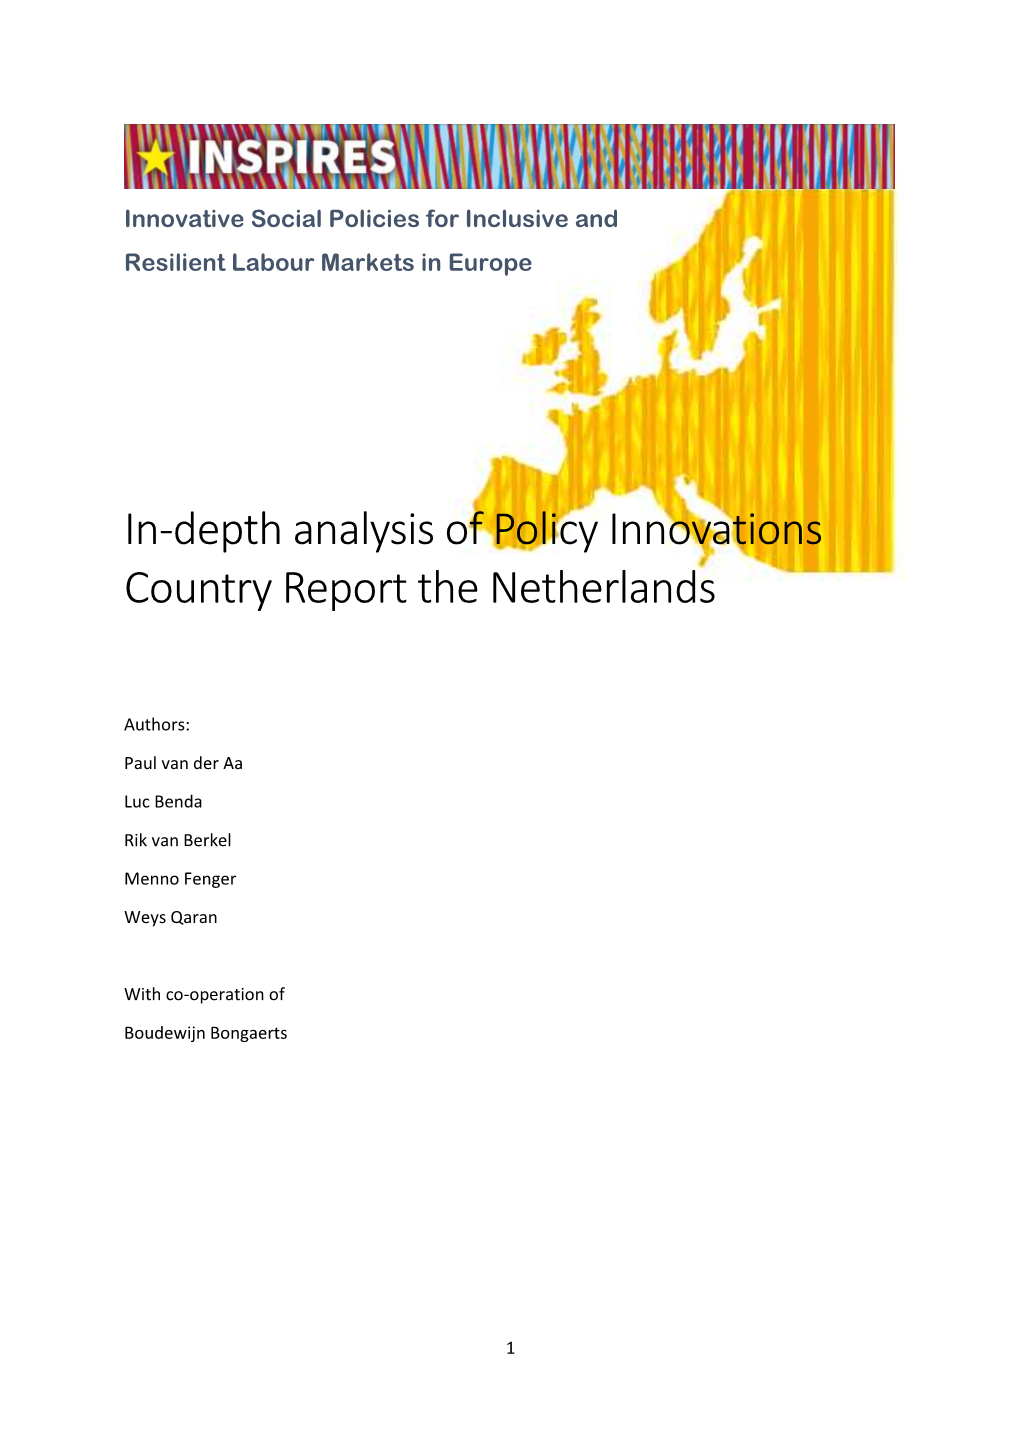 In-Depth Analysis of Policy Innovations Country Report the Netherlands